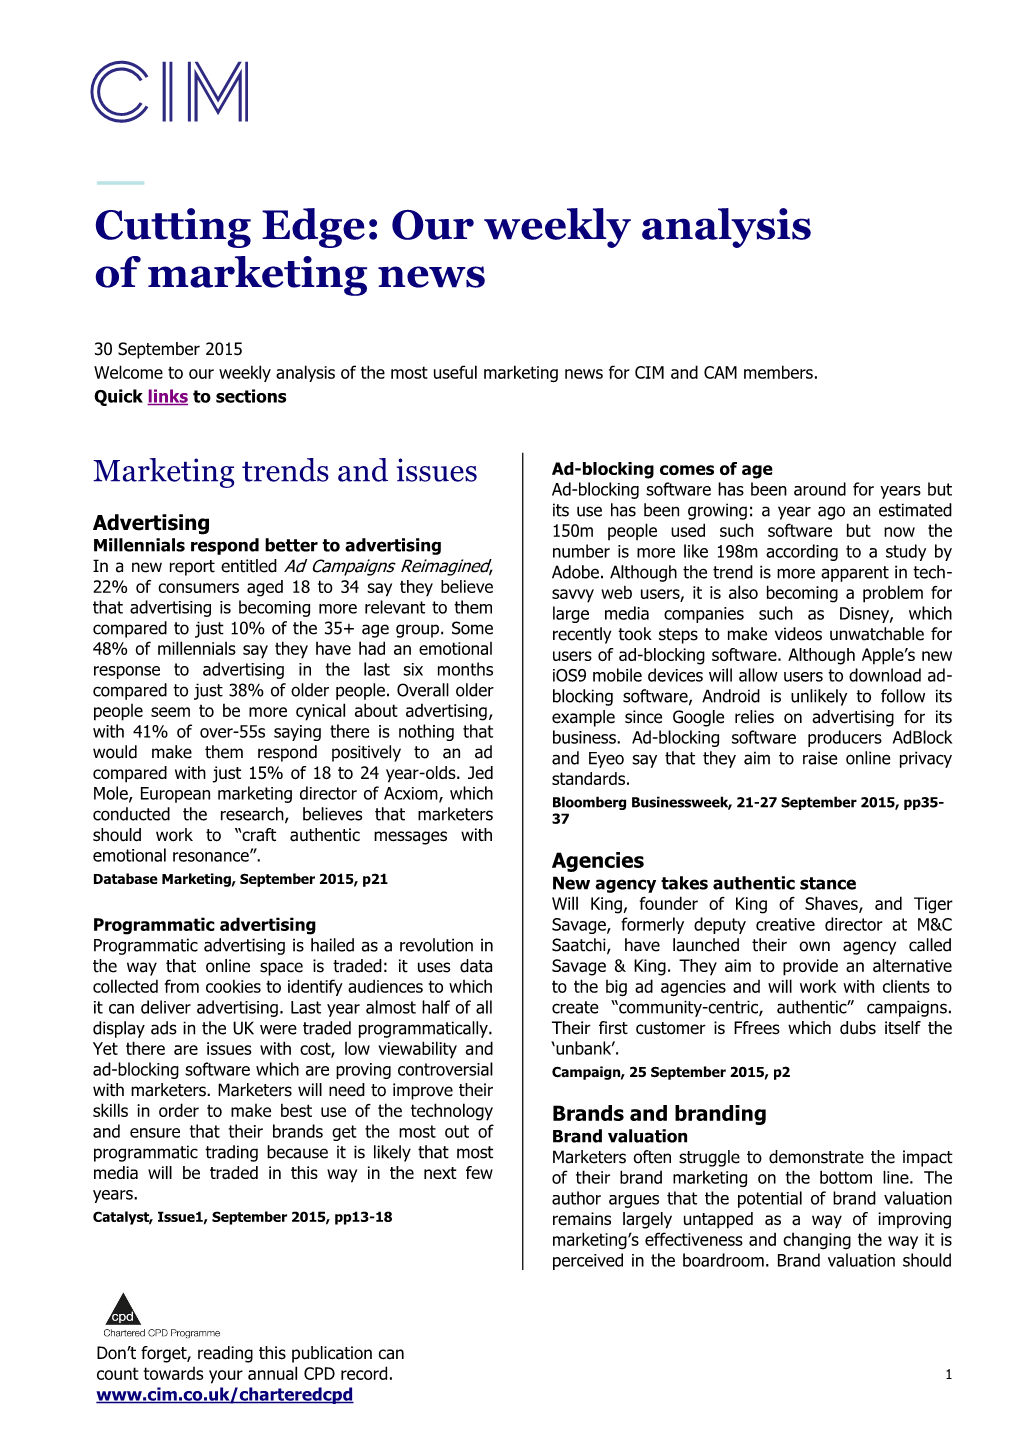 Cutting Edge: Our Weekly Analysis of Marketing News